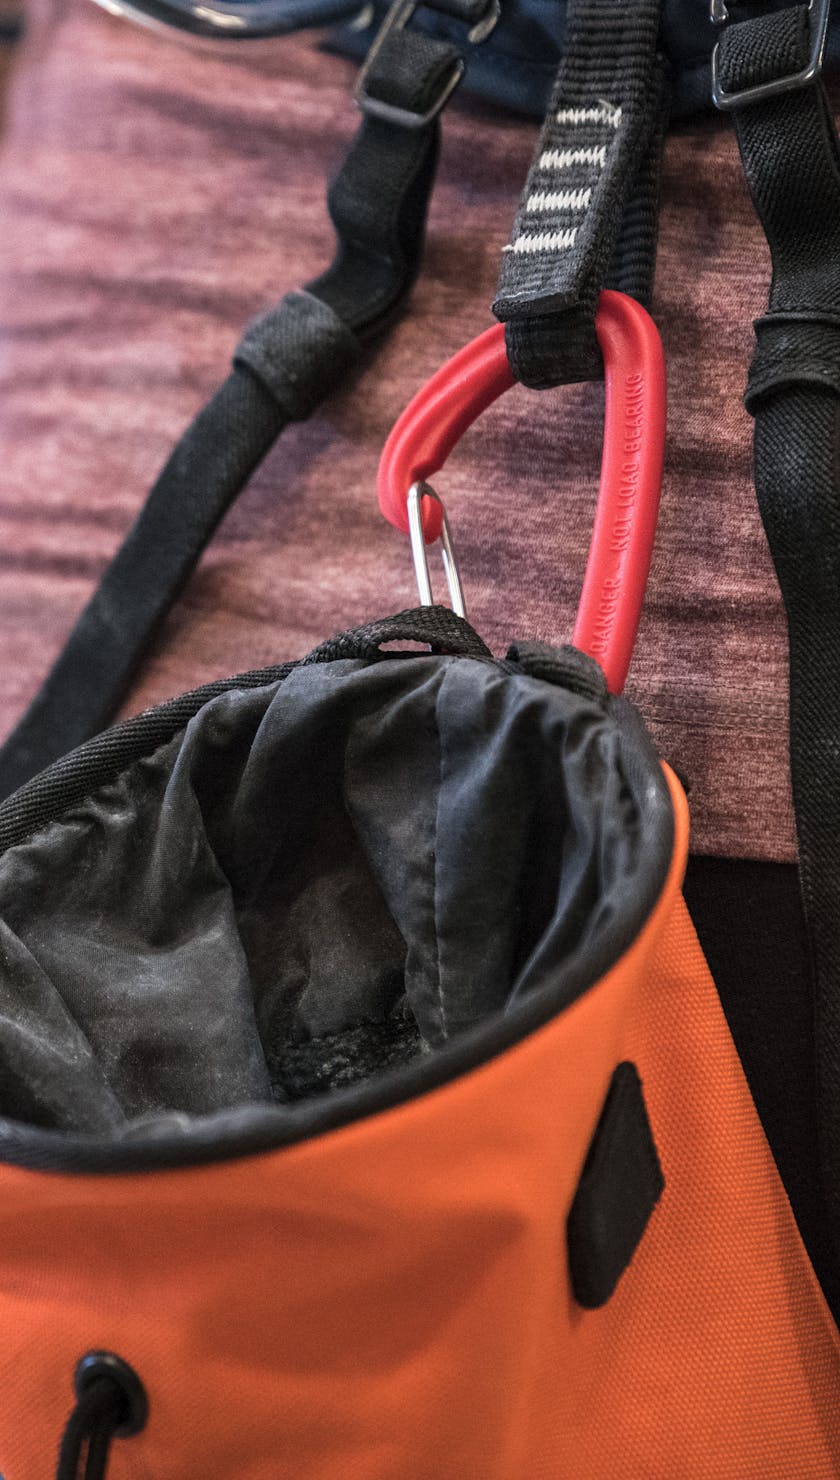 Chalk Bag clipped to a harness